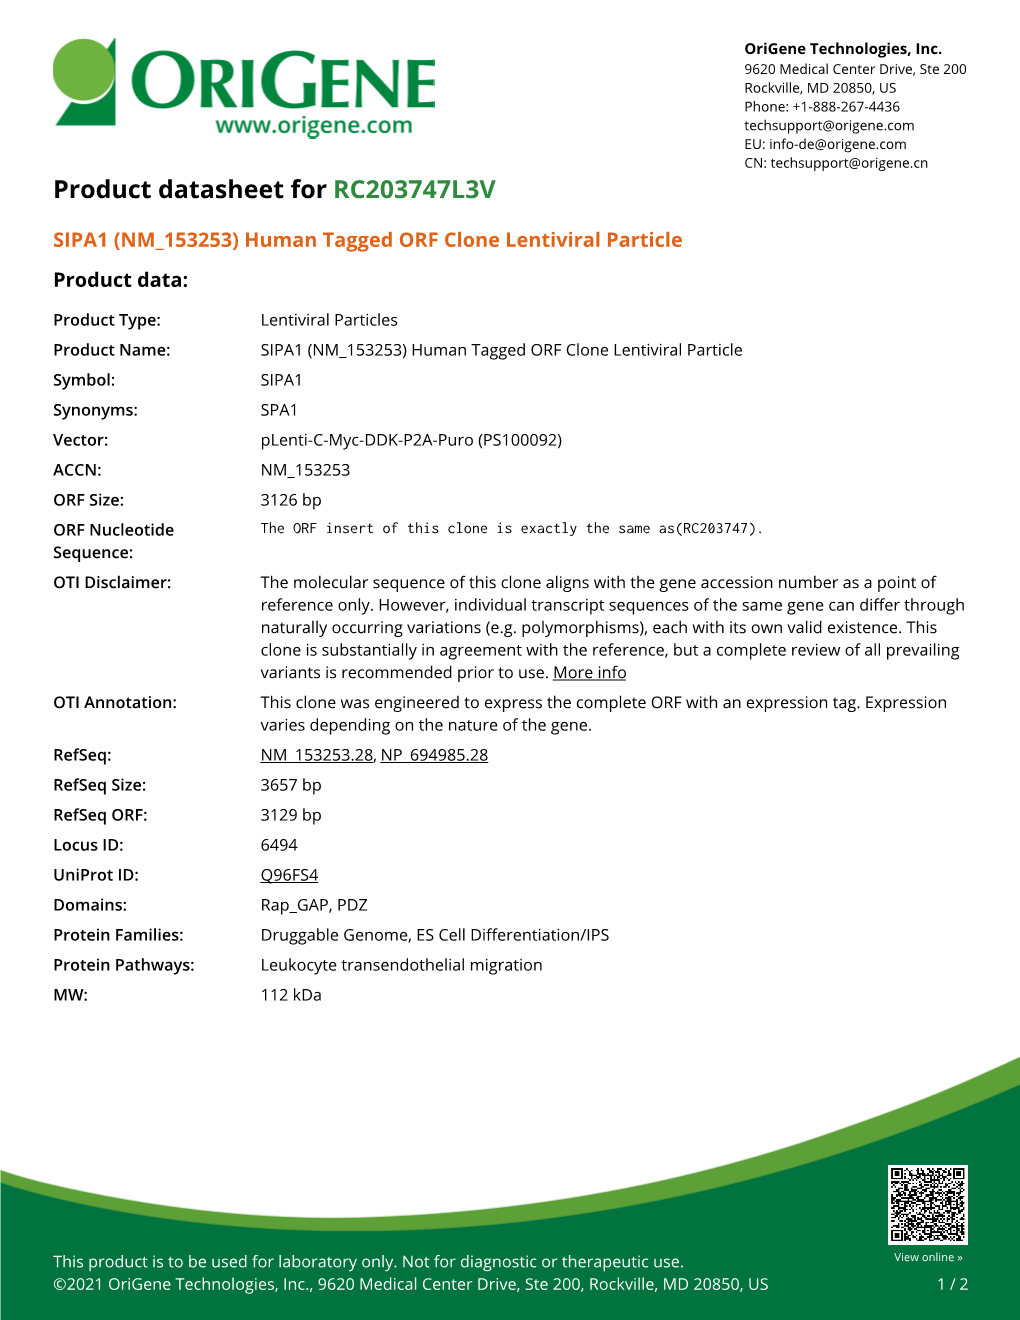 SIPA1 (NM 153253) Human Tagged ORF Clone Lentiviral Particle Product Data